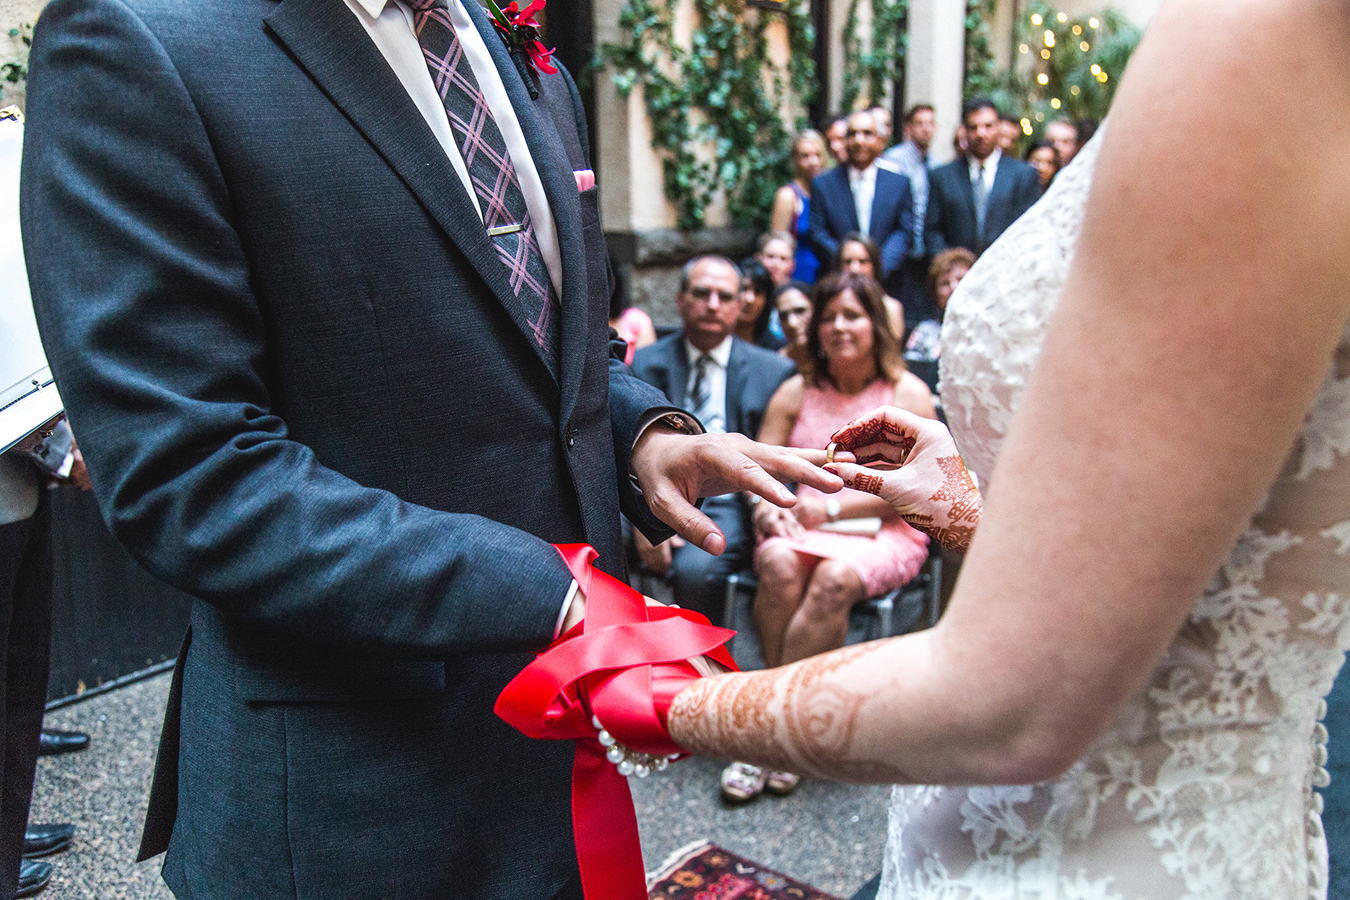 Parents watch as a couple exchanges wedding rings with fasted hands at a small wedding ceremony in Vancouver